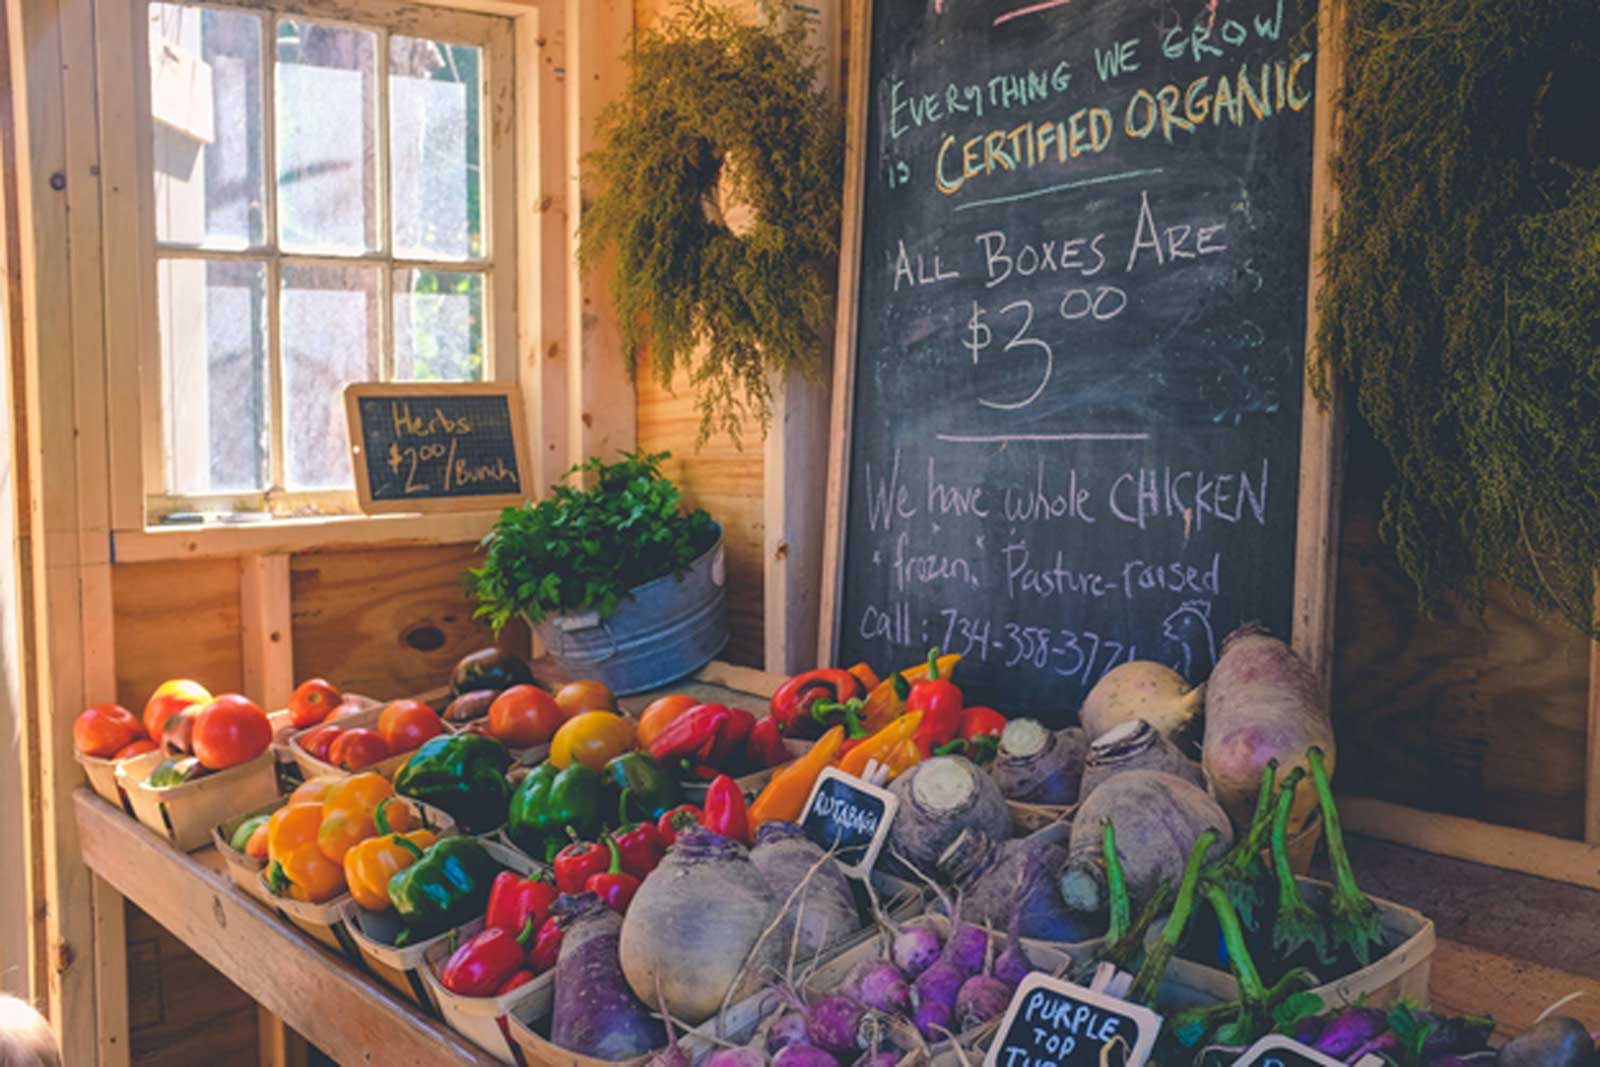 Everything You Need to Know About Organic Food